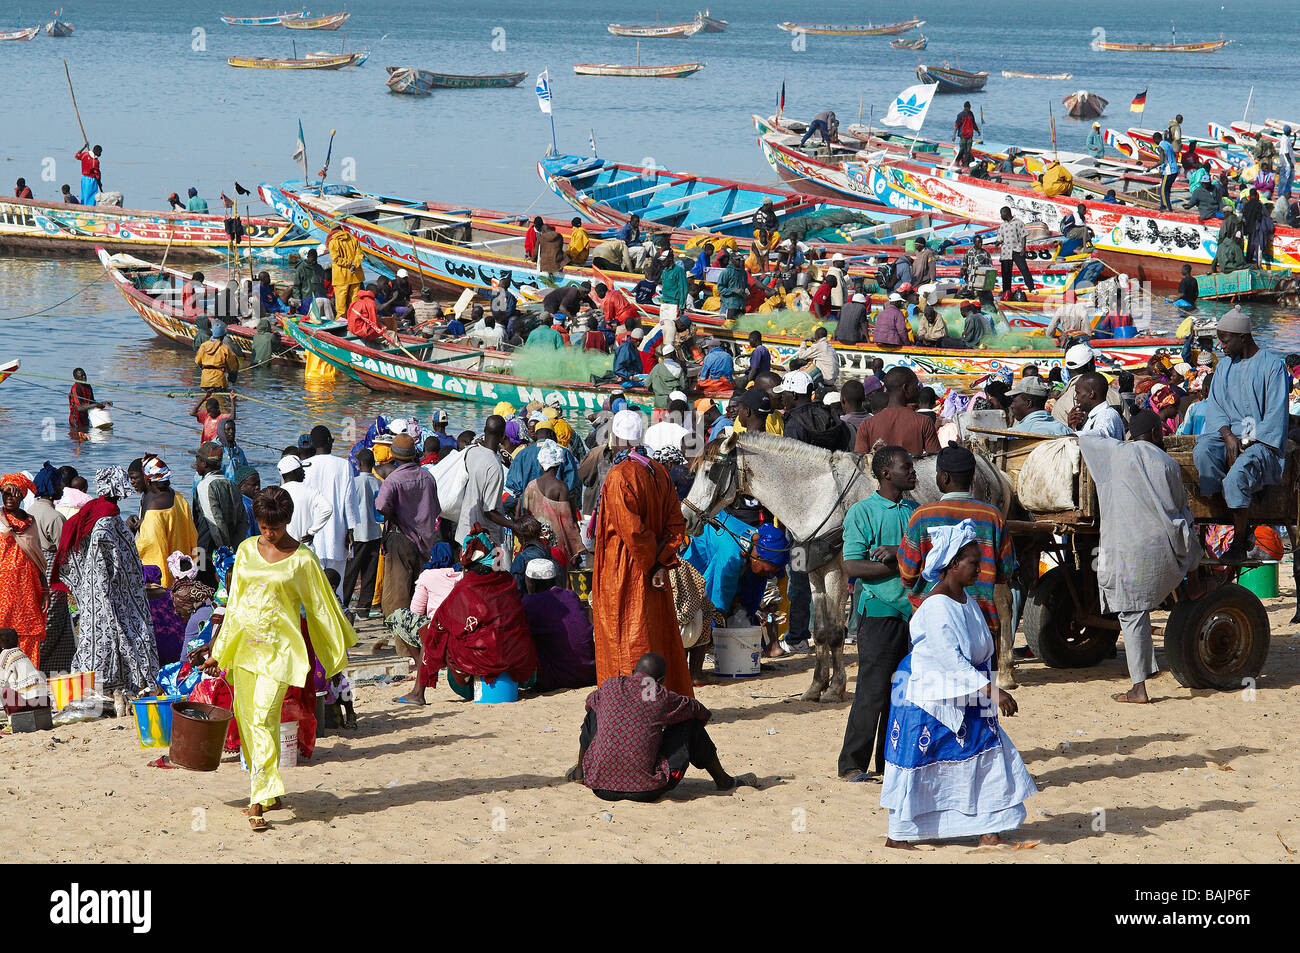 Senegal, Thies Region, the Petite Cote, Mbour fishing harbour, crowd in the beach Stock Photo